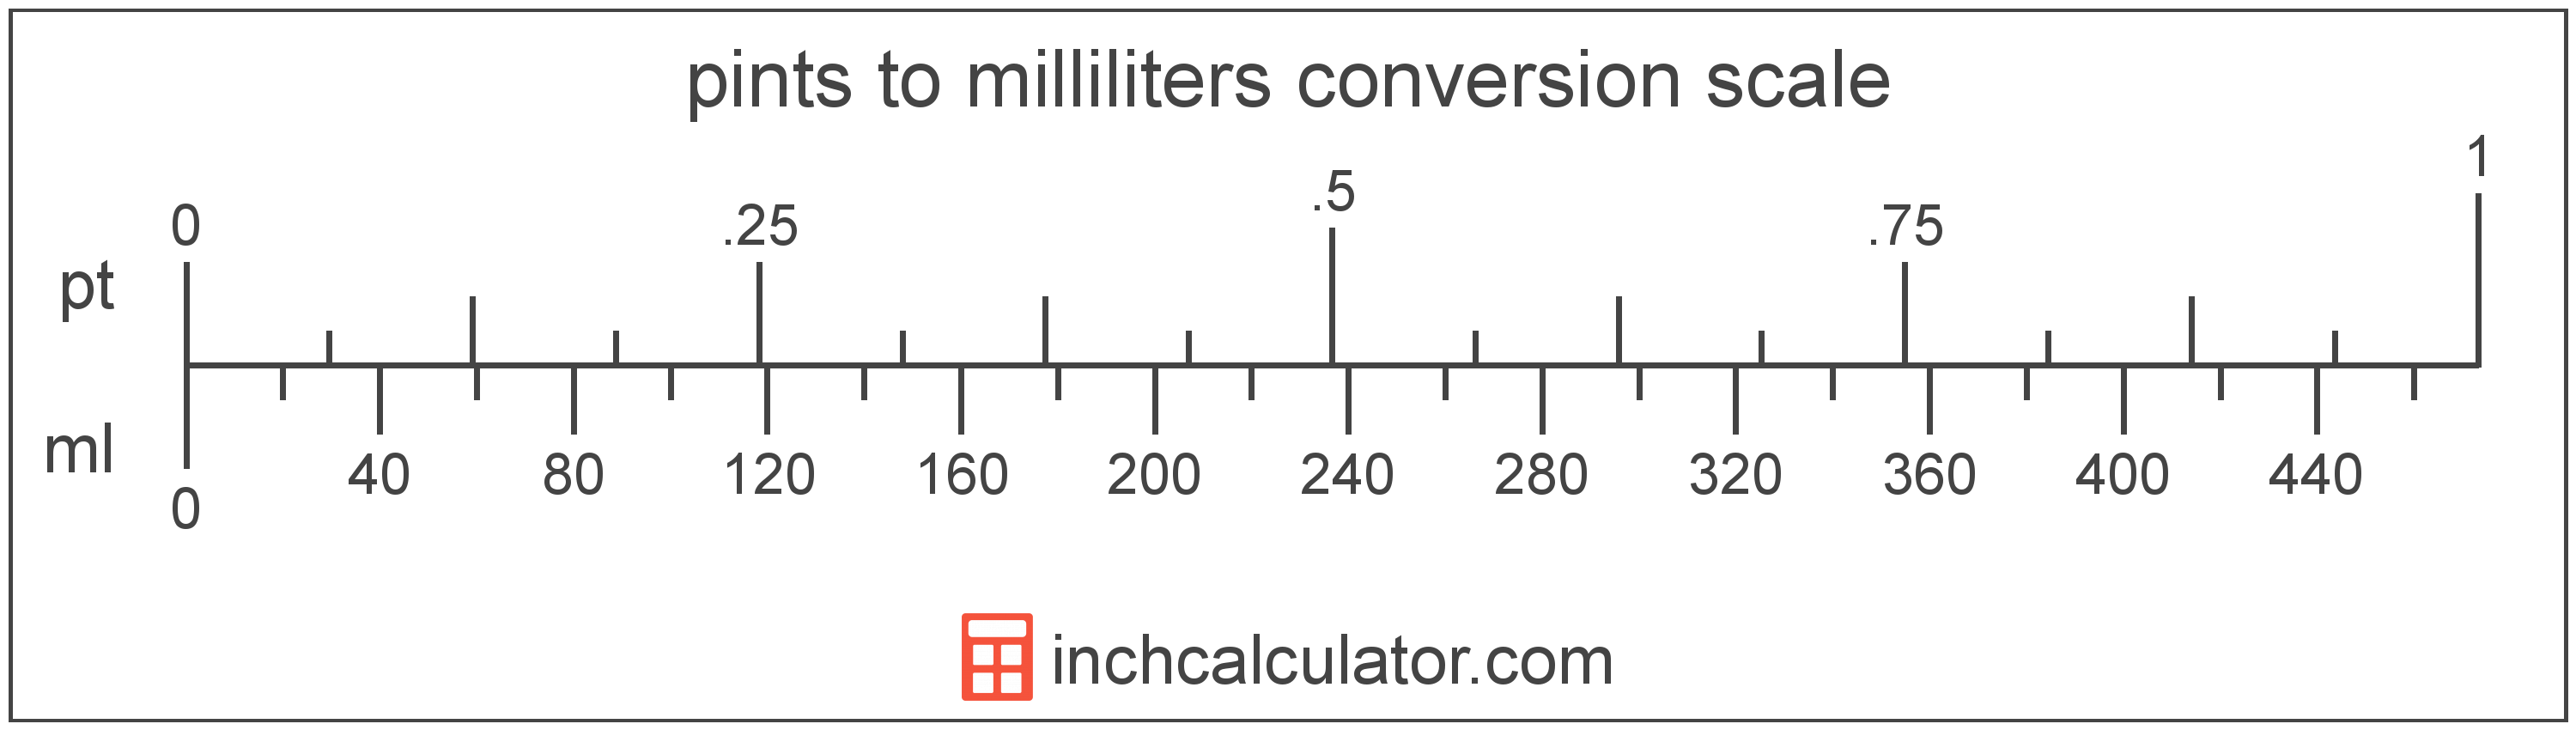 conversion scale showing pints and equivalent milliliters volume values